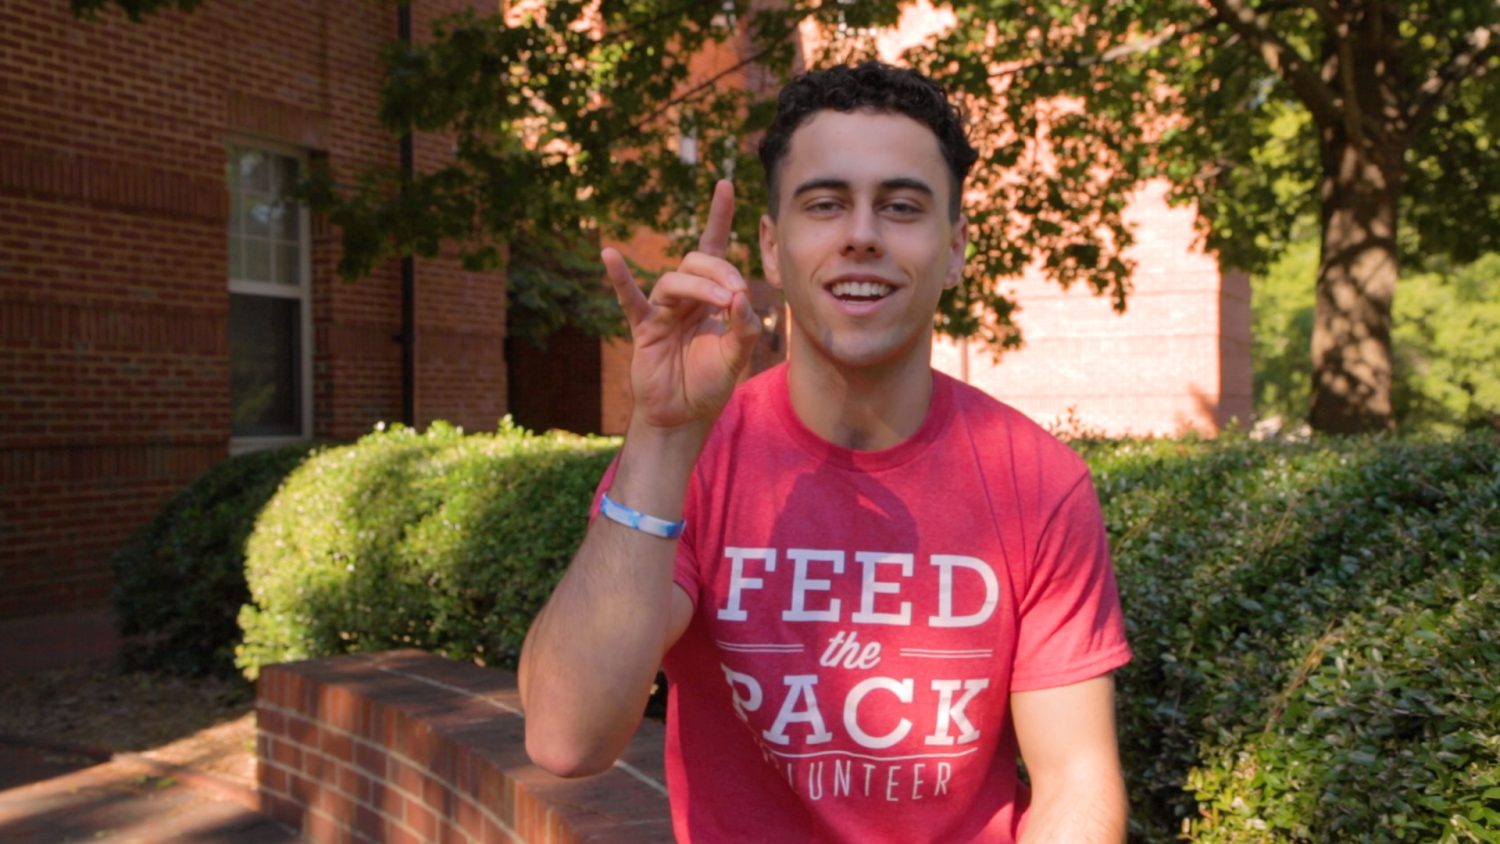 Cameron Morris '23 has been involved with Feed the Pack throughout his NC State career.